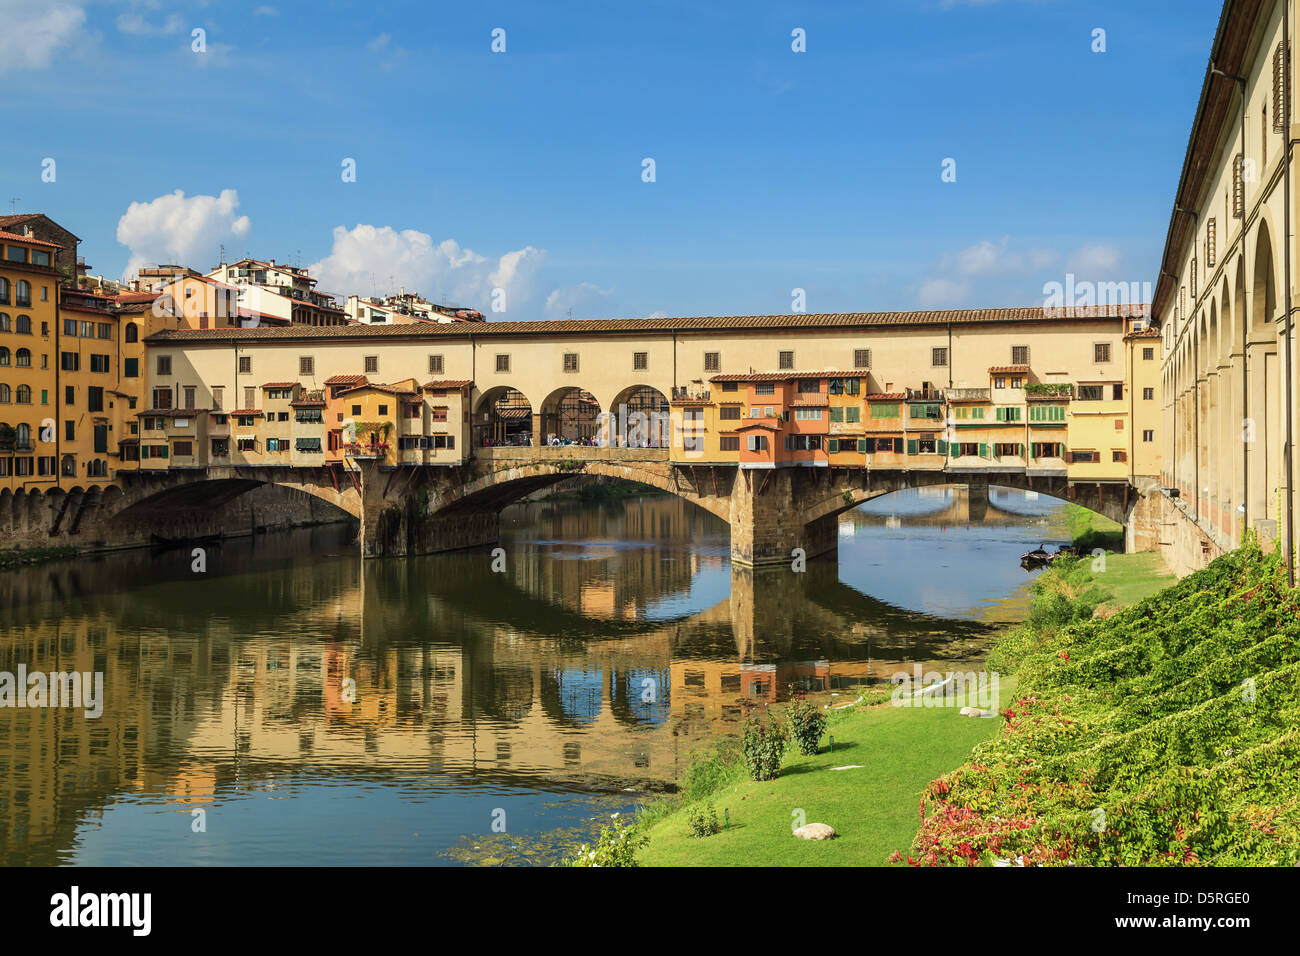 Ponte Vecchio bridge over the fiume Arno river in Florence Italy in evening light. Stock Photo